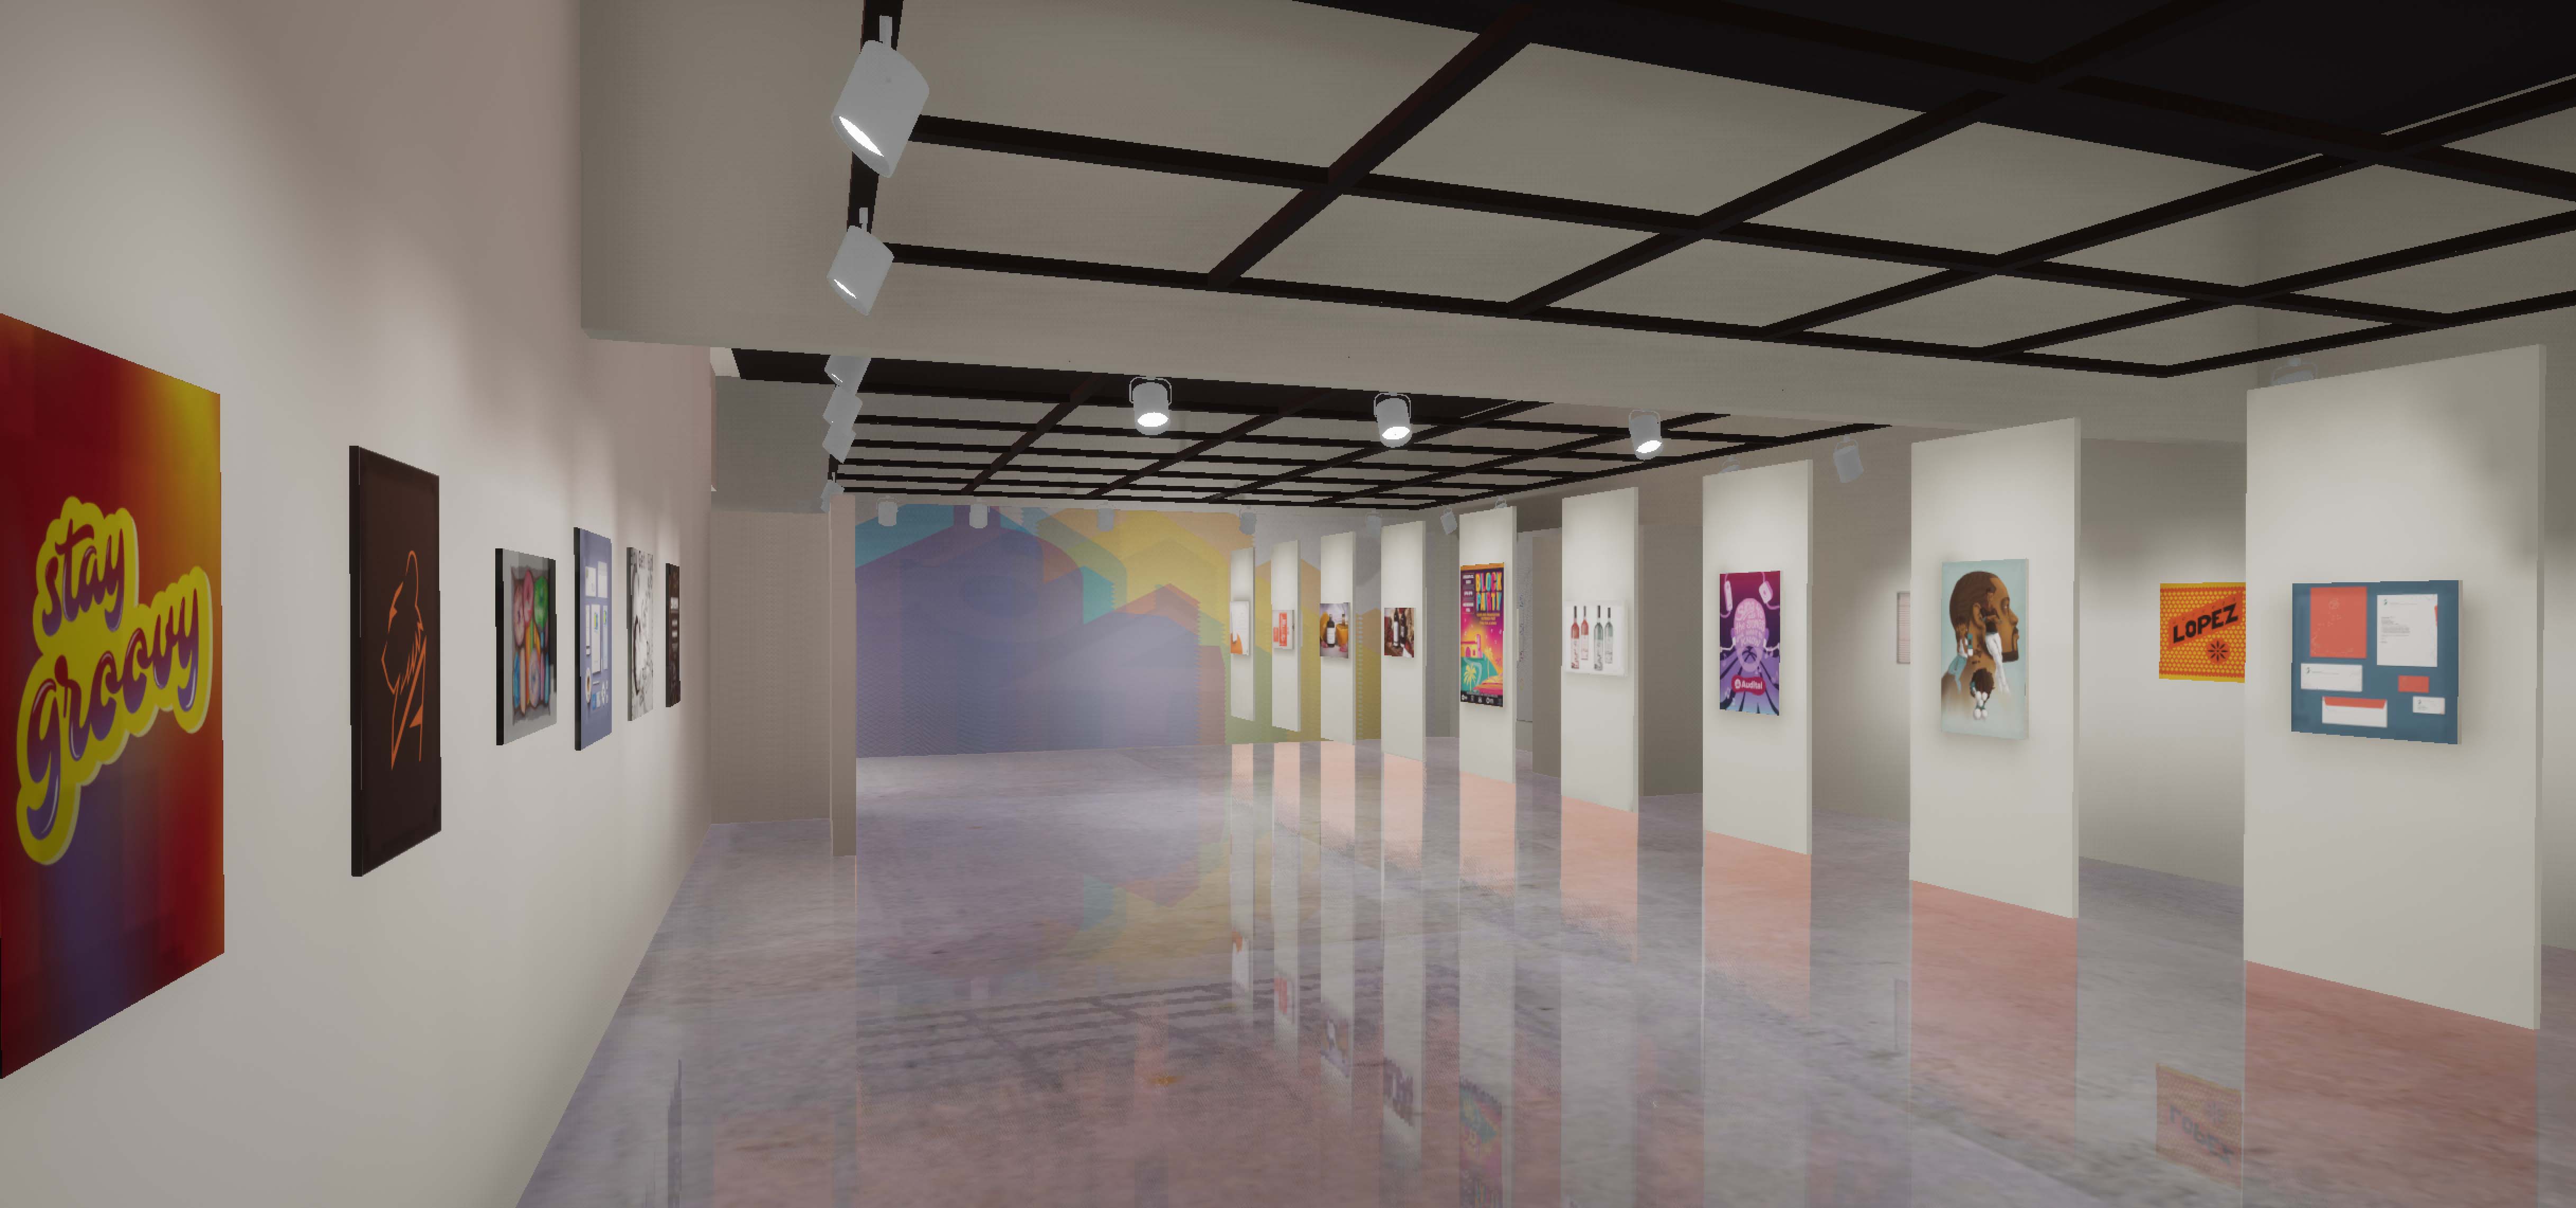 Image of virtual 3d gallery. Various 2d work is mounted on gallery walls.